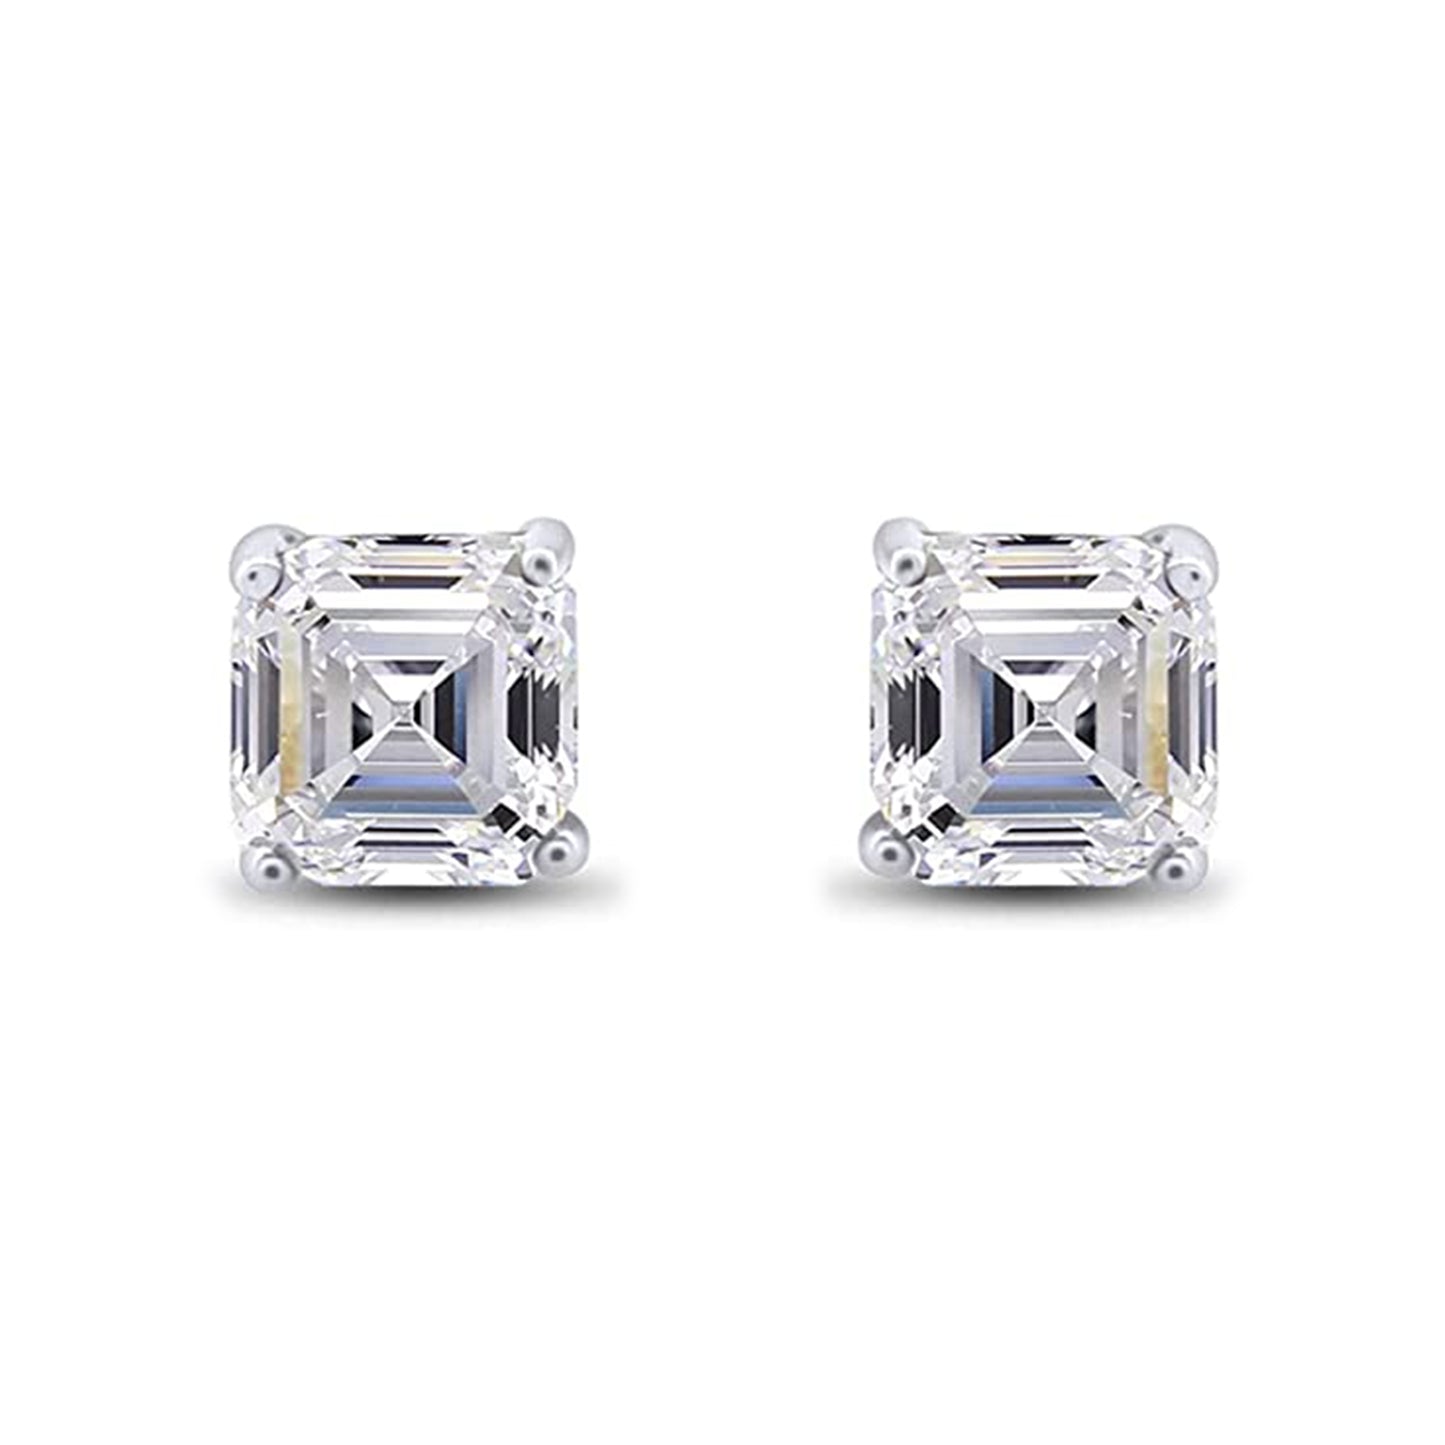 Load image into Gallery viewer, 2 Carat Asscher Cut Cubic Zirconia Solitaire Stud Earrings for Women in 925 Sterling Silver
